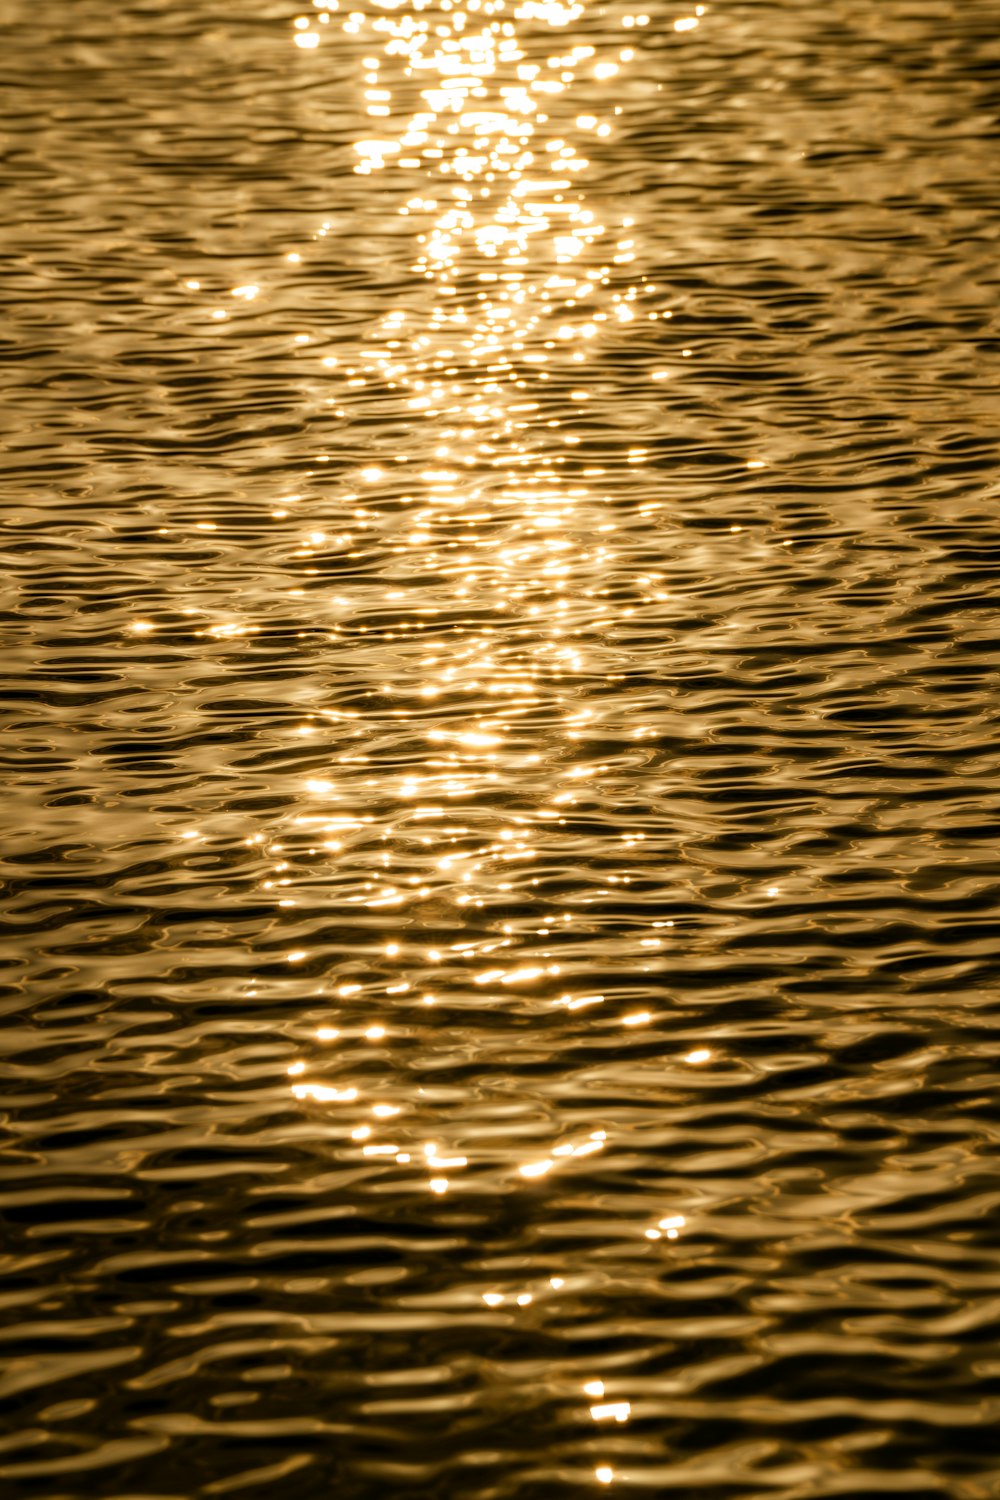 the sun shines on the water as it reflects in the water